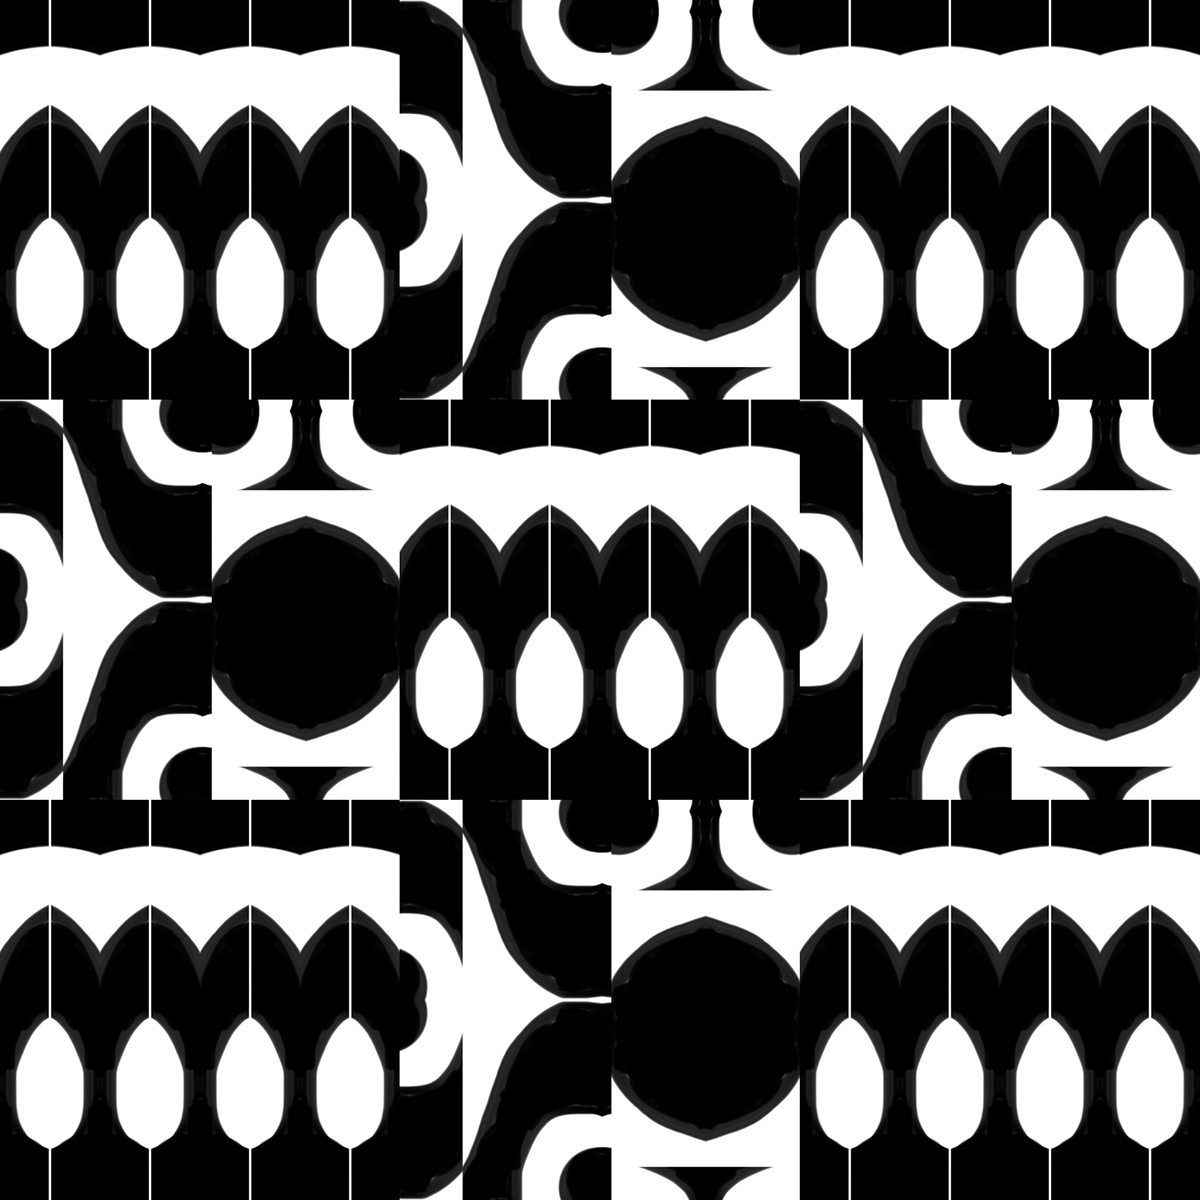 Tents in Space Patterns digital painting black White